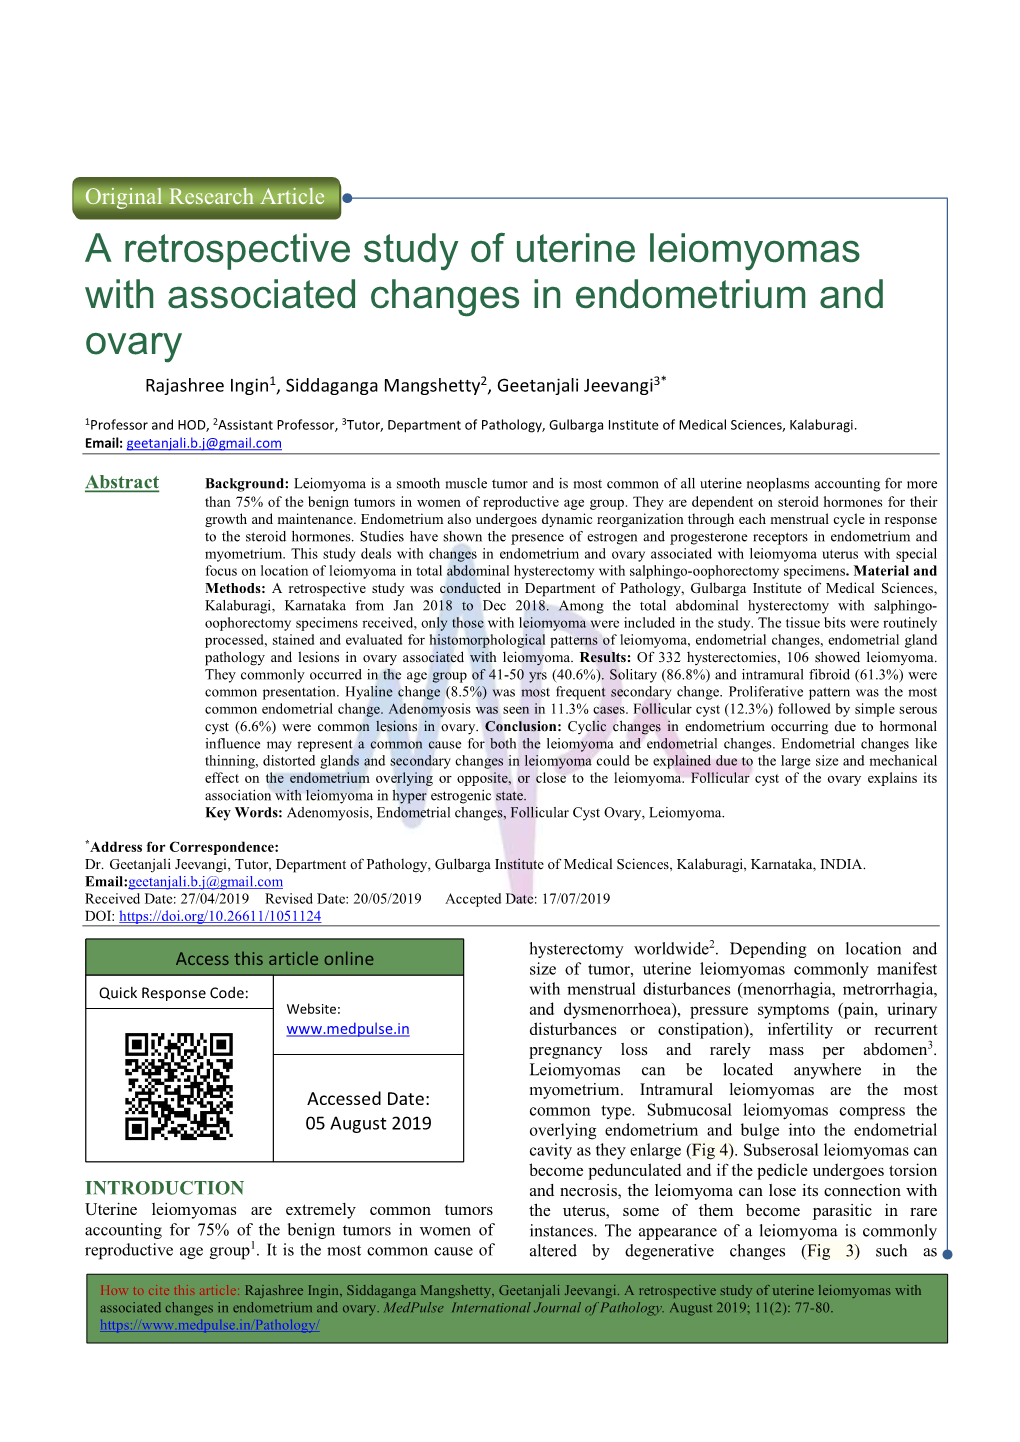 A Retrospective Study of Uterine Leiomyomas with Associated Changes in Endometrium and Ovary